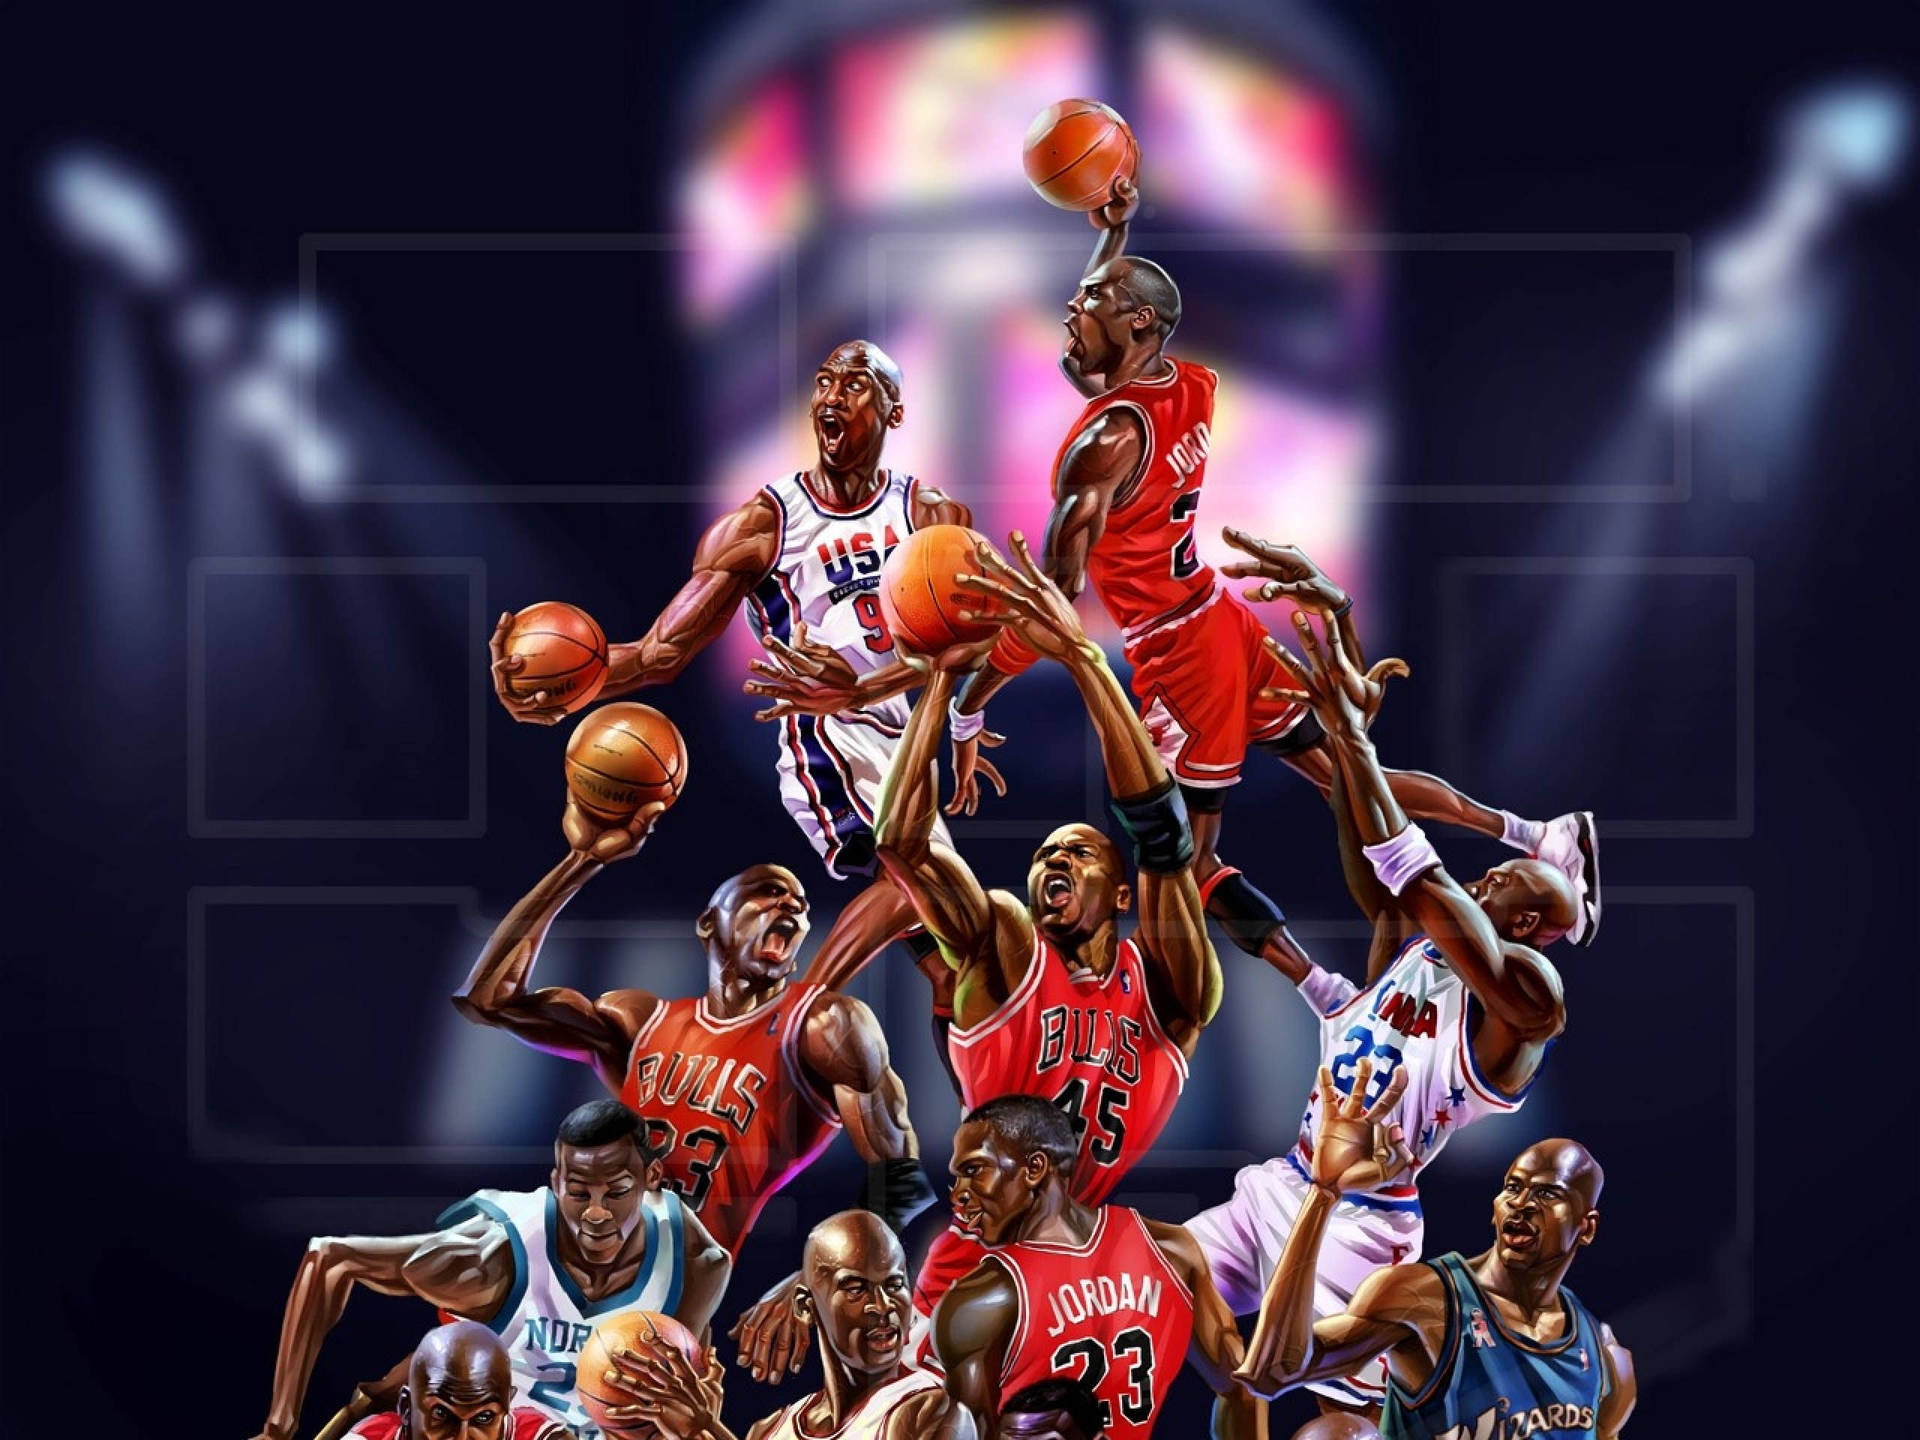 Michael Jordan dunking during a game with the Chicago Bulls. Wallpaper